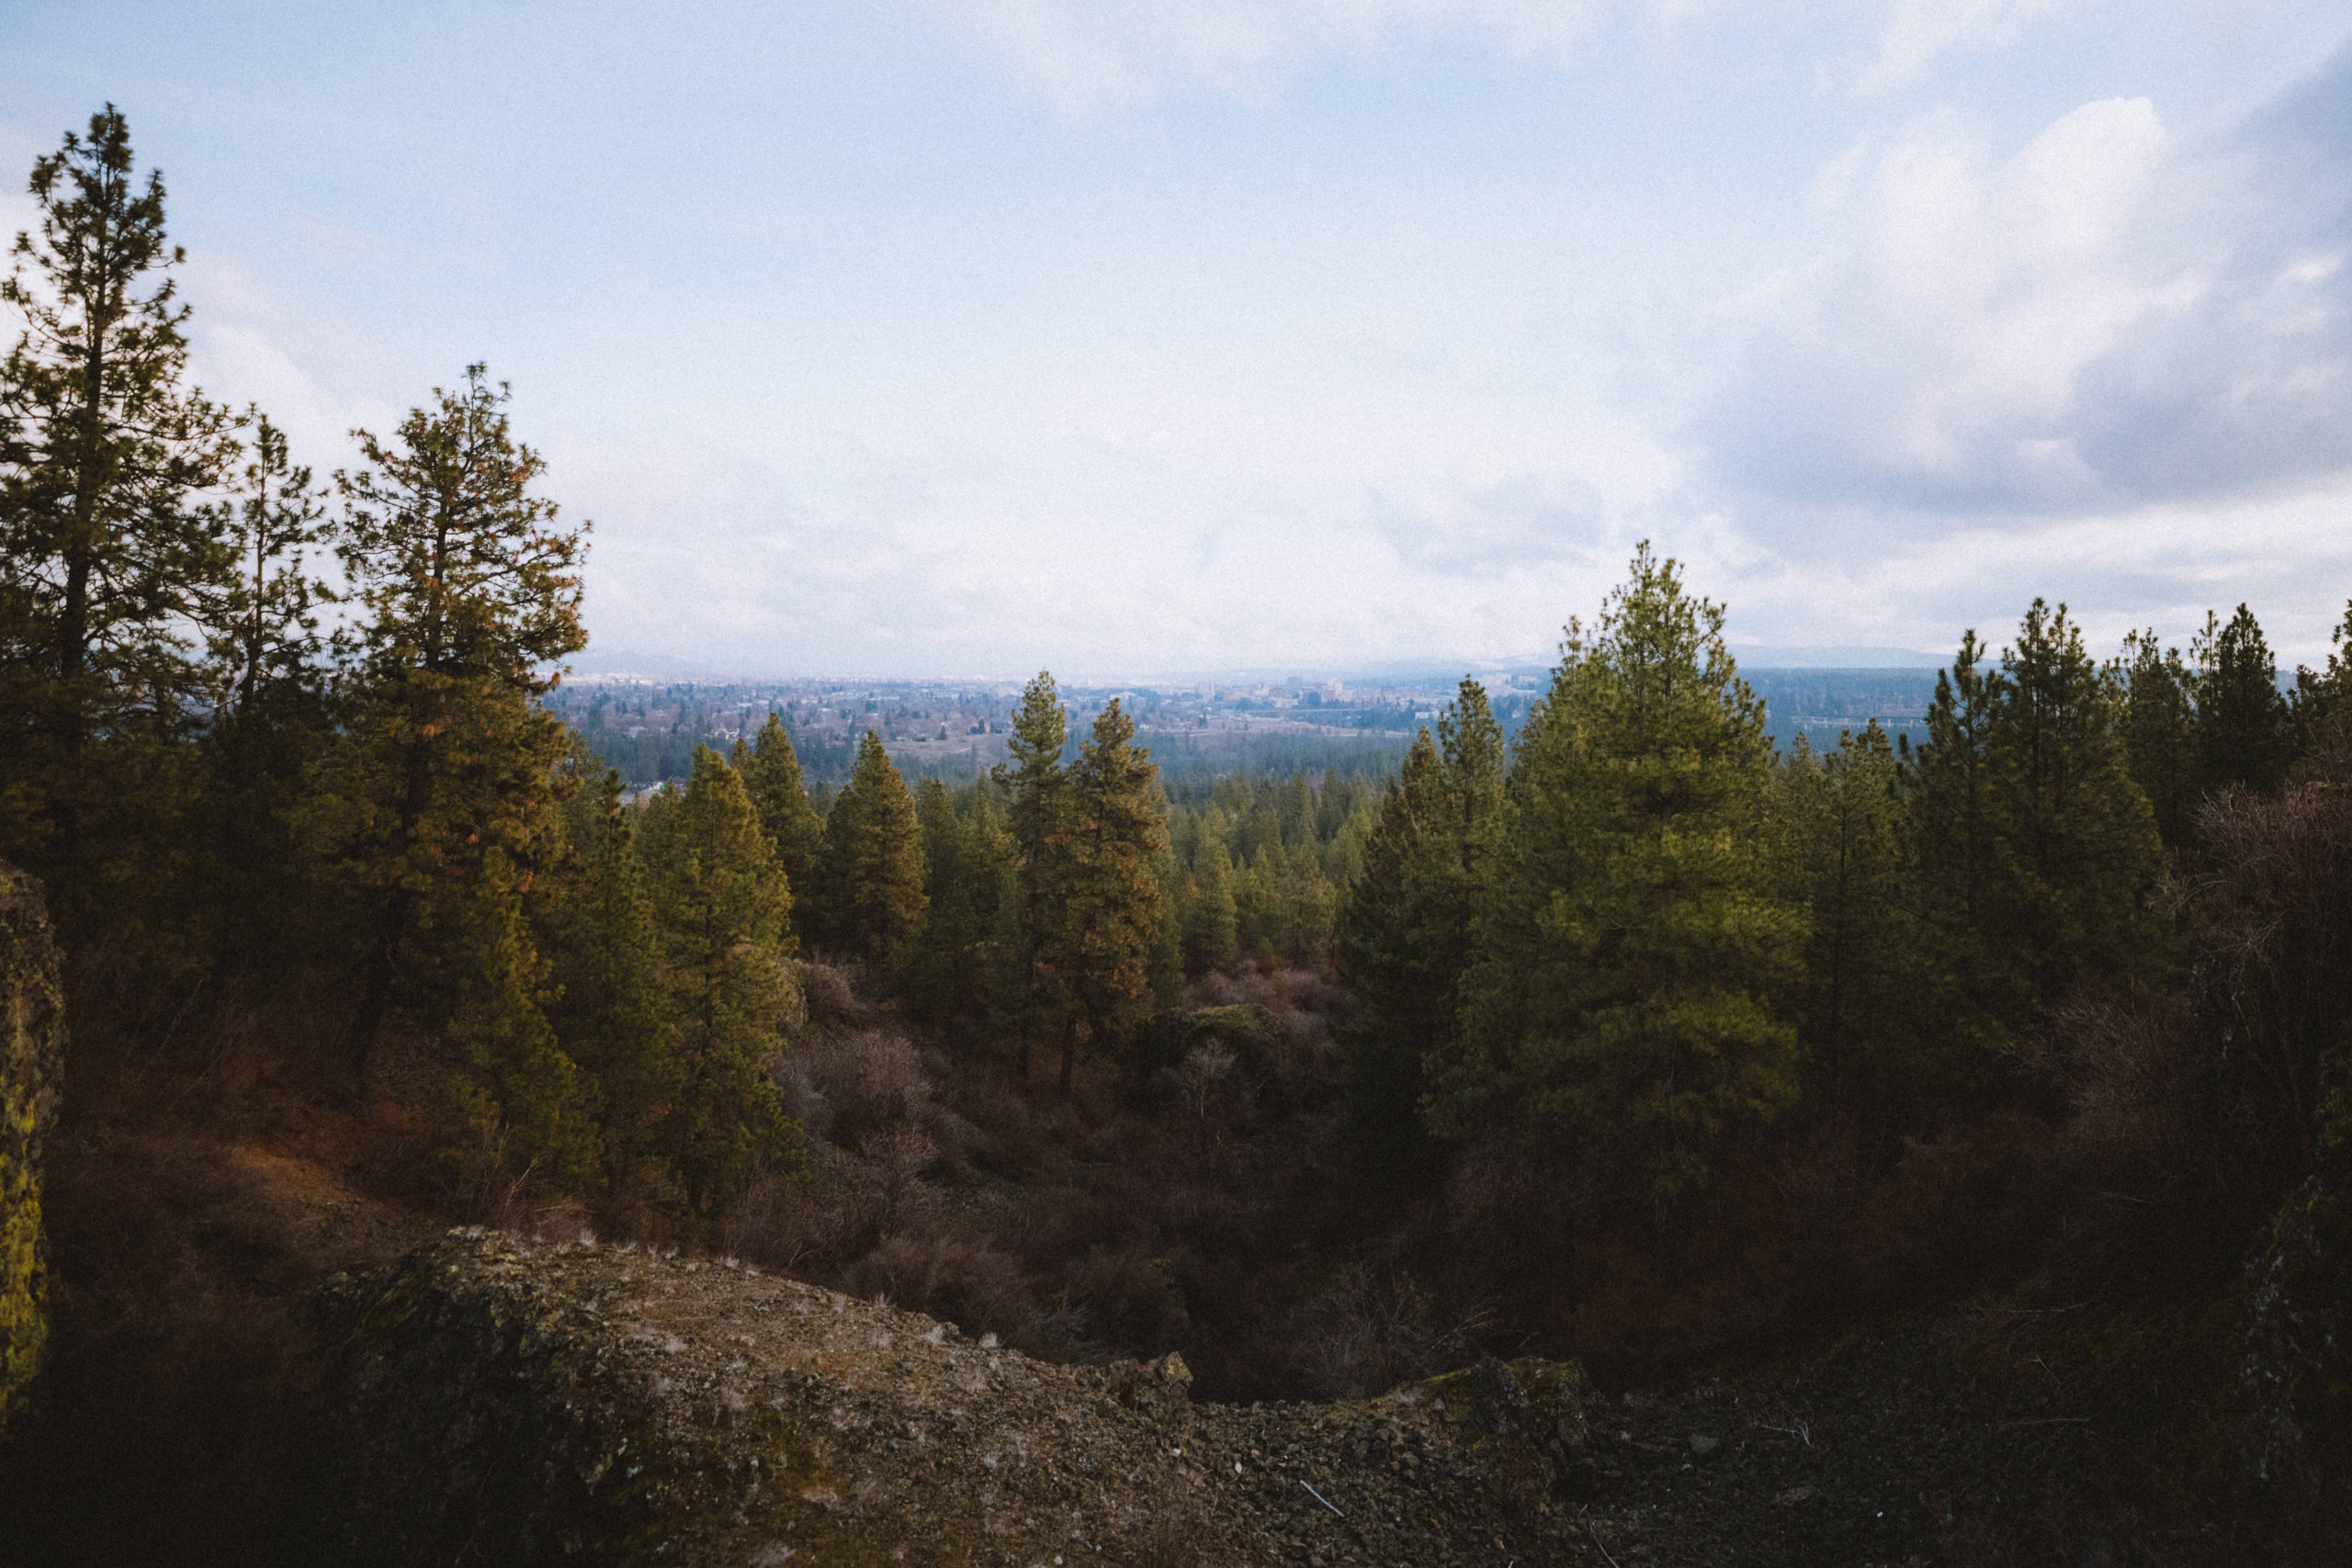 Hike Palisades Park Trail In Spokane For Beautiful City Views